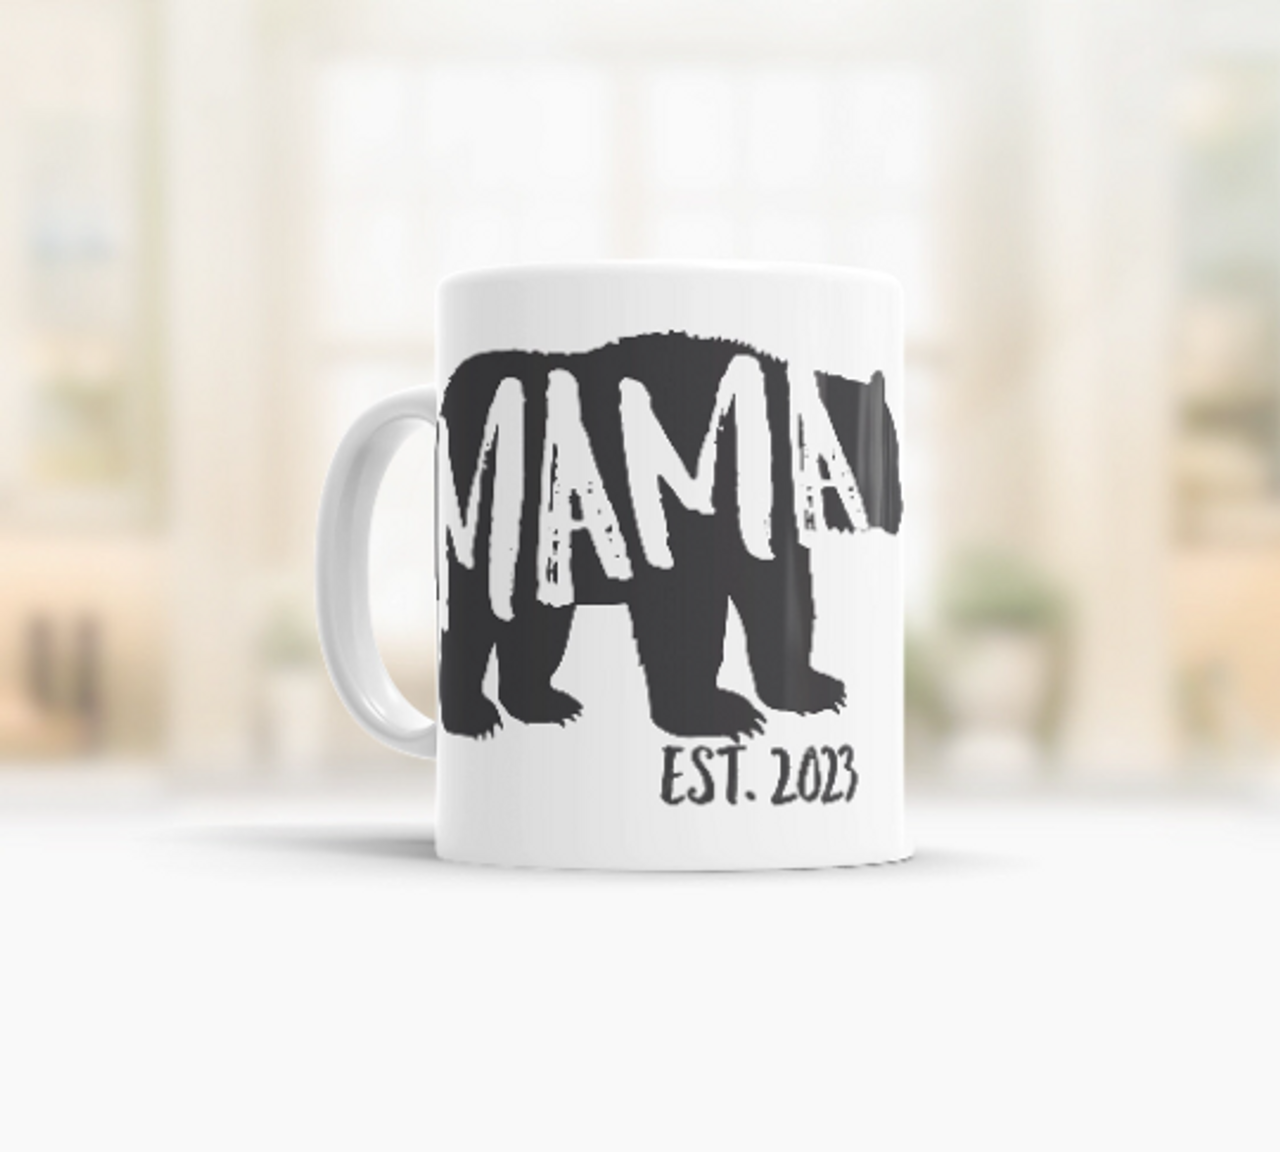 https://cdn11.bigcommerce.com/s-6a772/images/stencil/1280x1280/products/3292/95902/mug2__67386.1679407811.png?c=2?imbypass=on